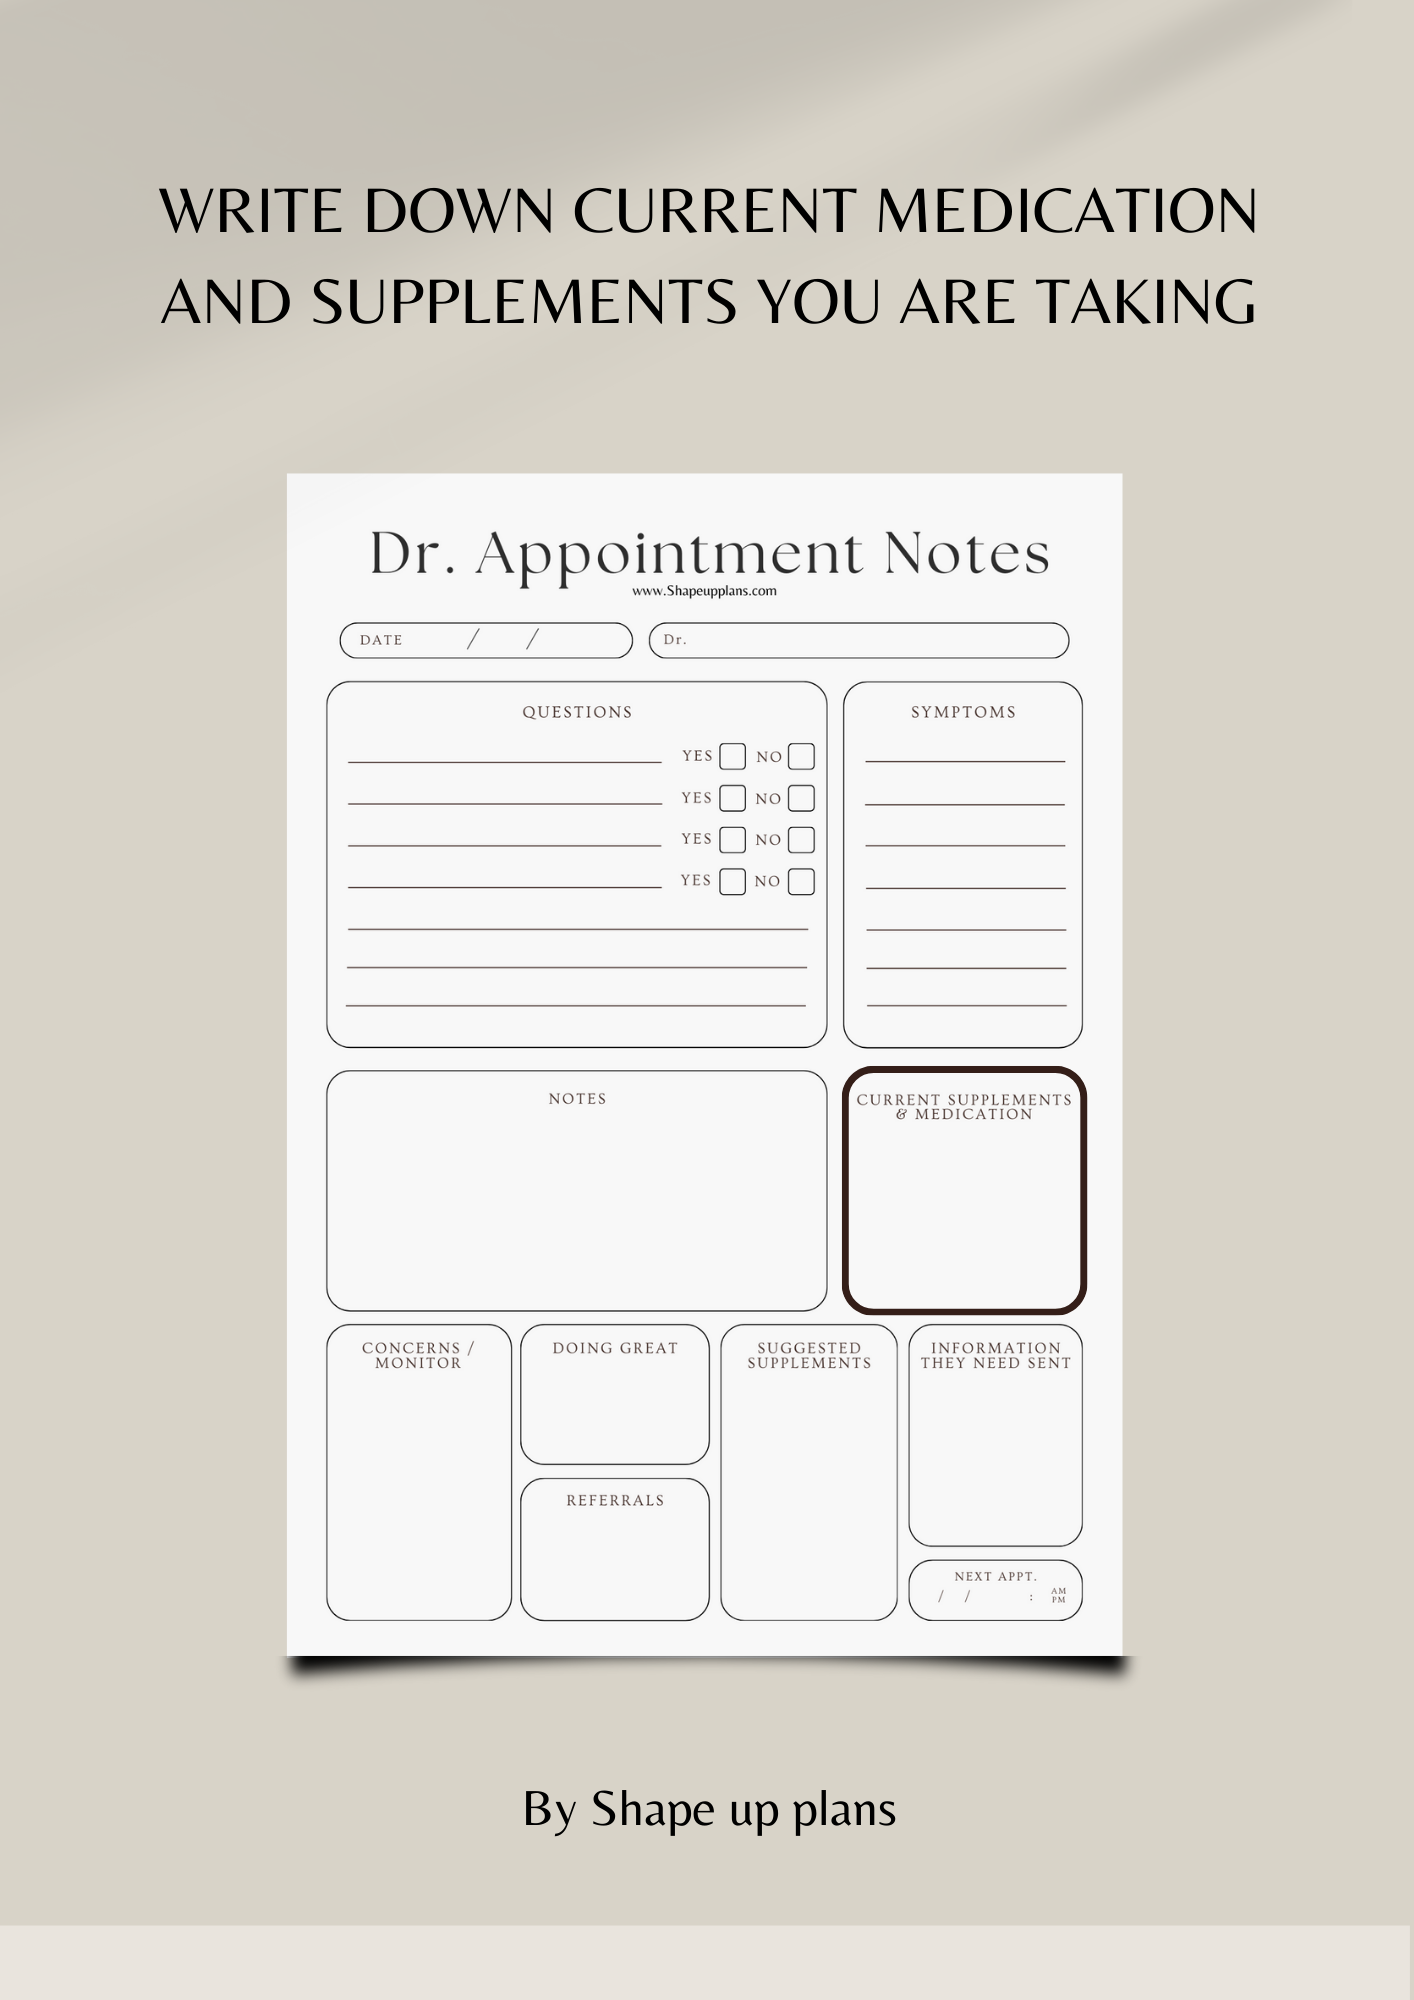 ADHD DR. APPOINTMENT NOTES